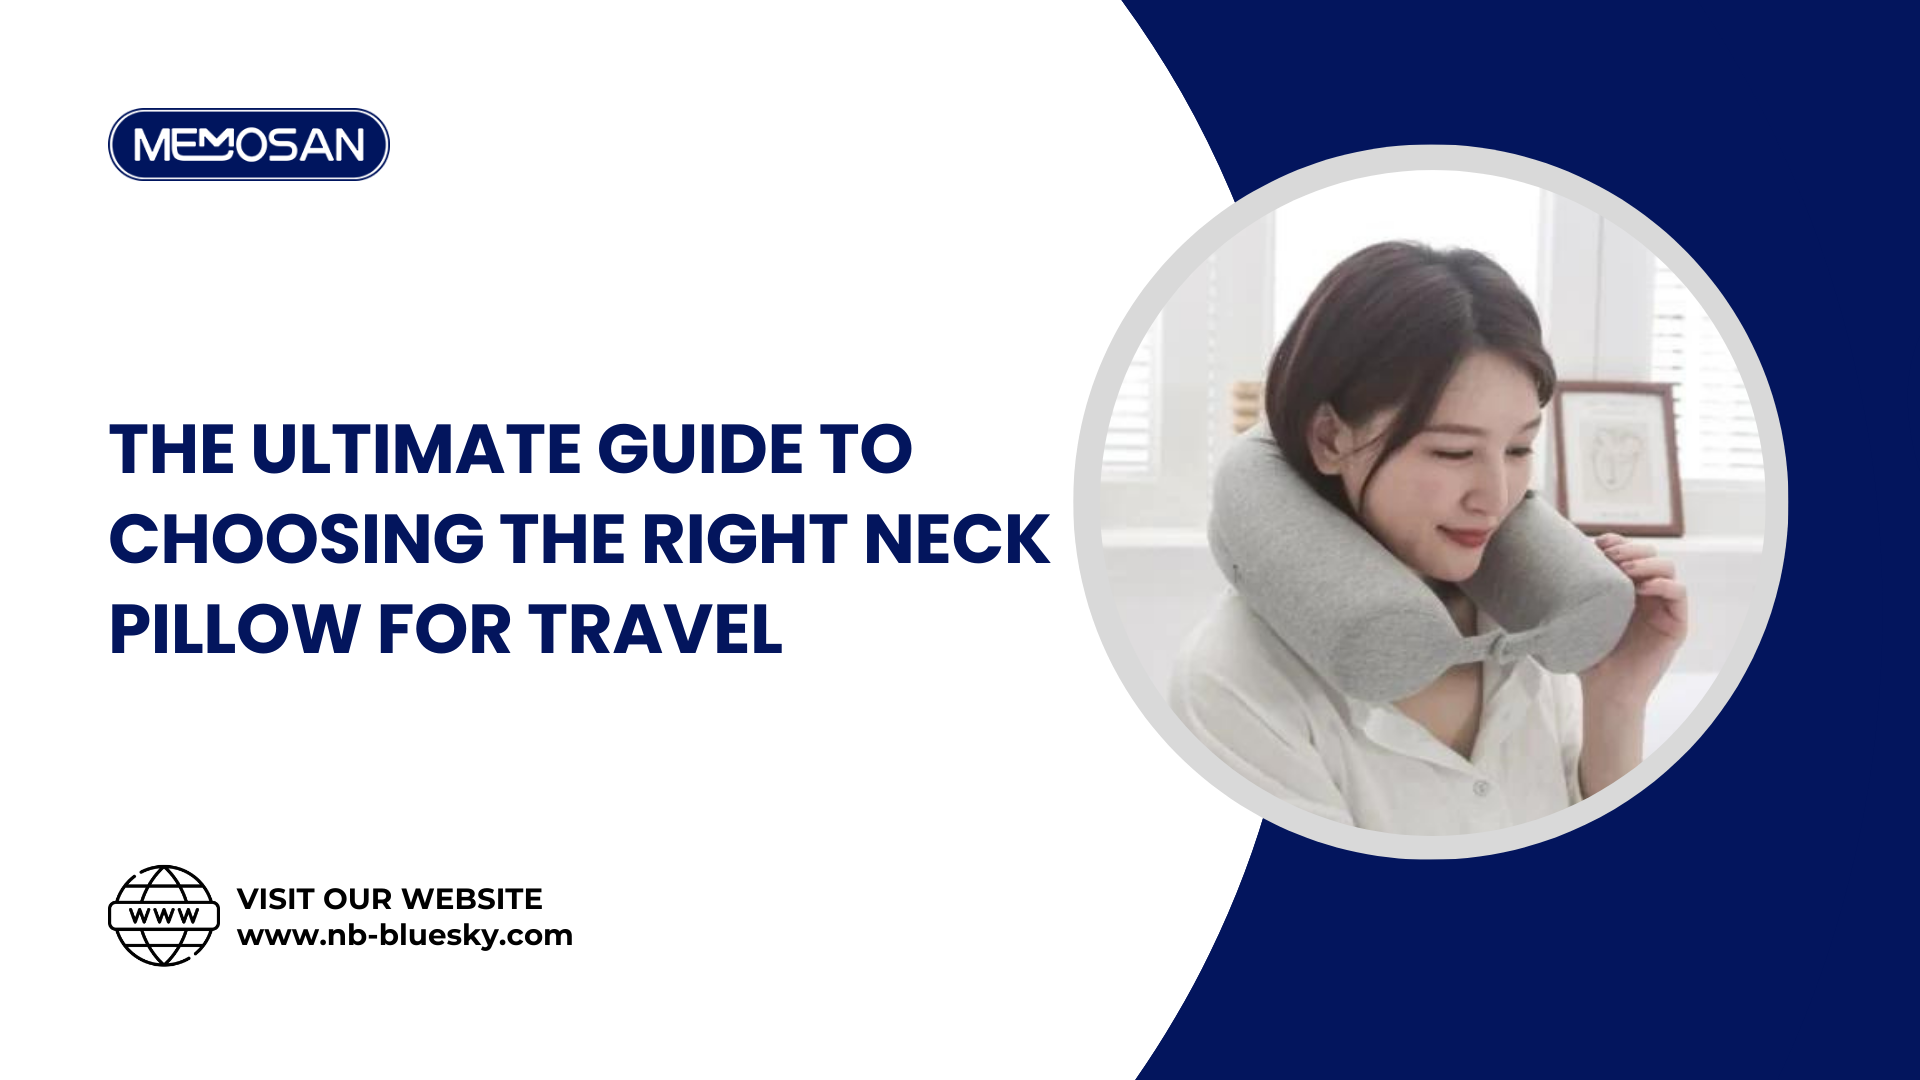 The Ultimate Guide to Choosing the Right Neck Pillow for Travel